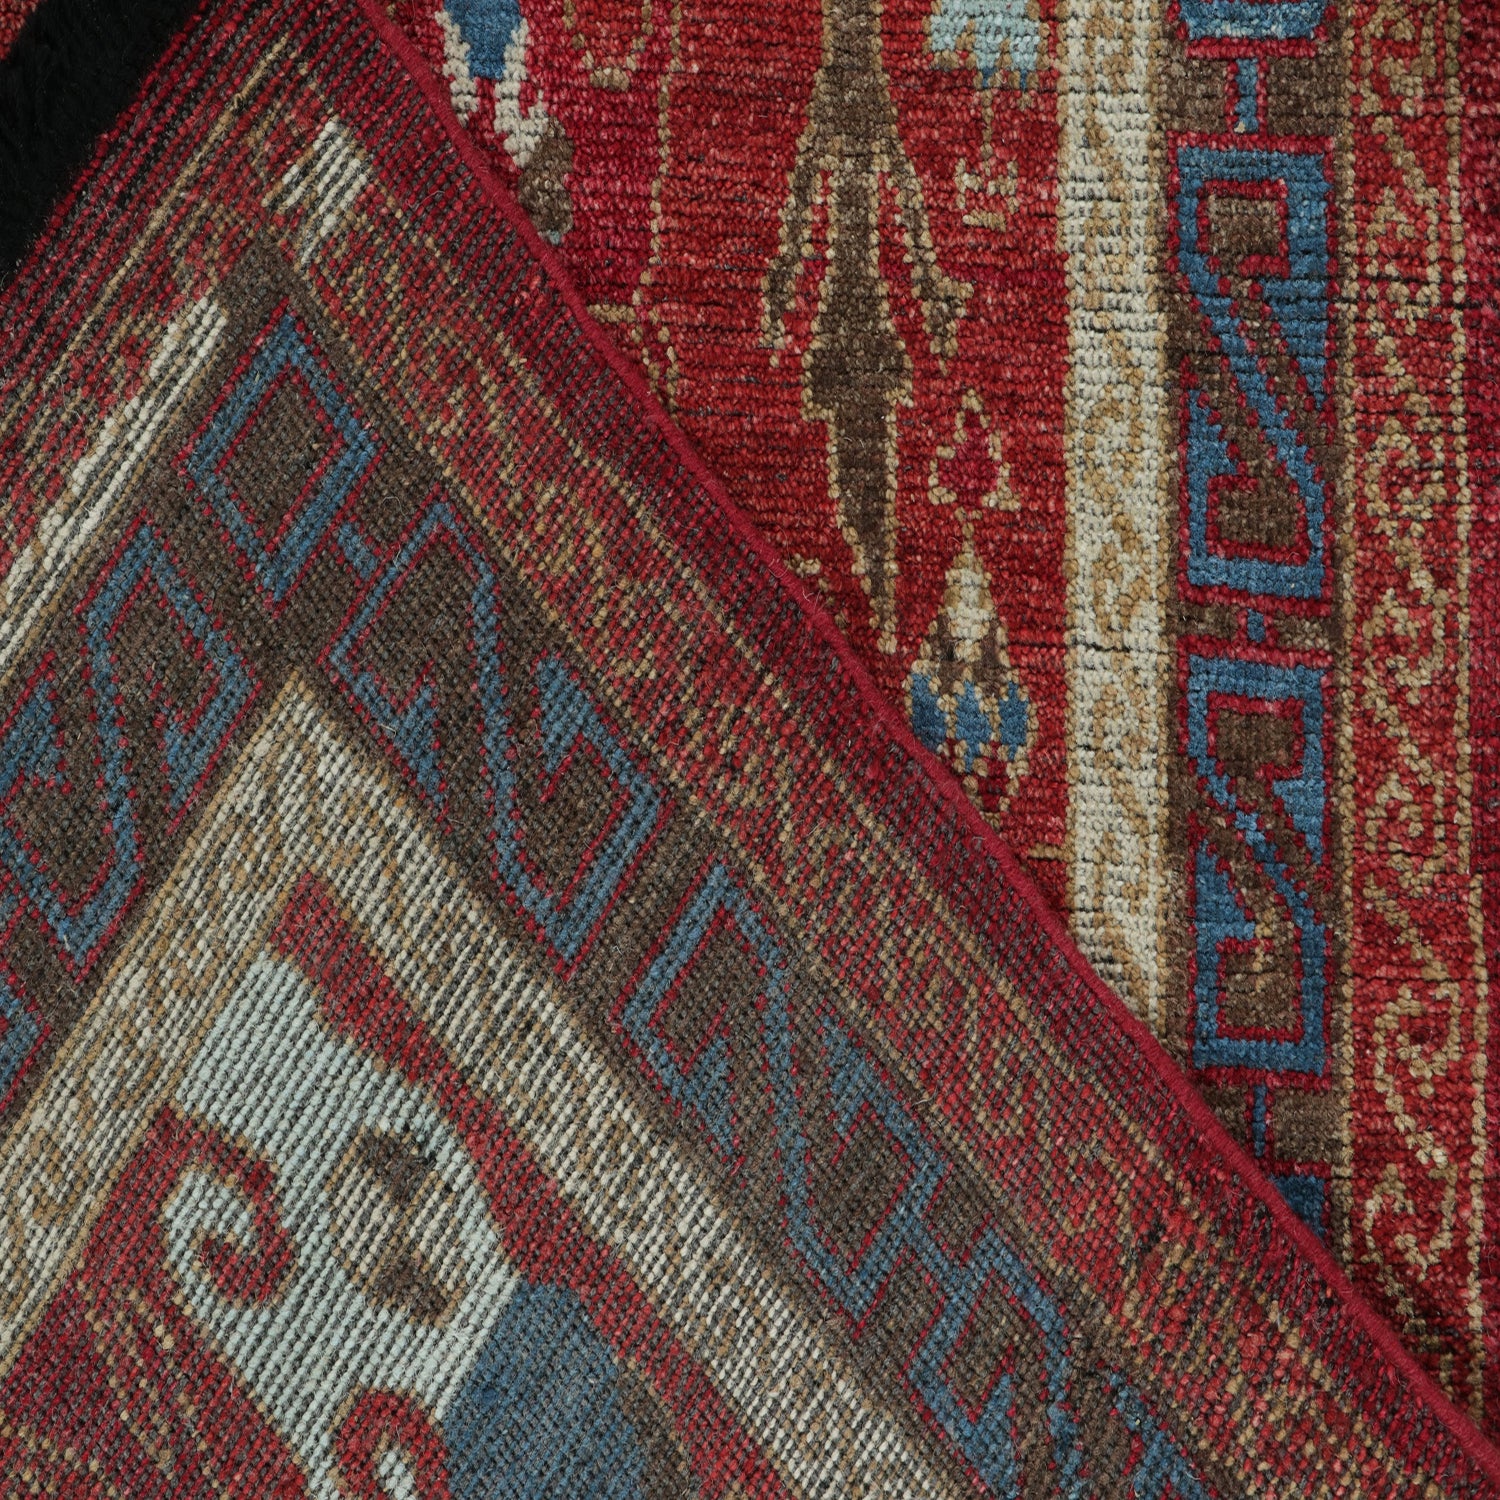 Close-up view of traditional handwoven carpets showcasing intricate patterns.